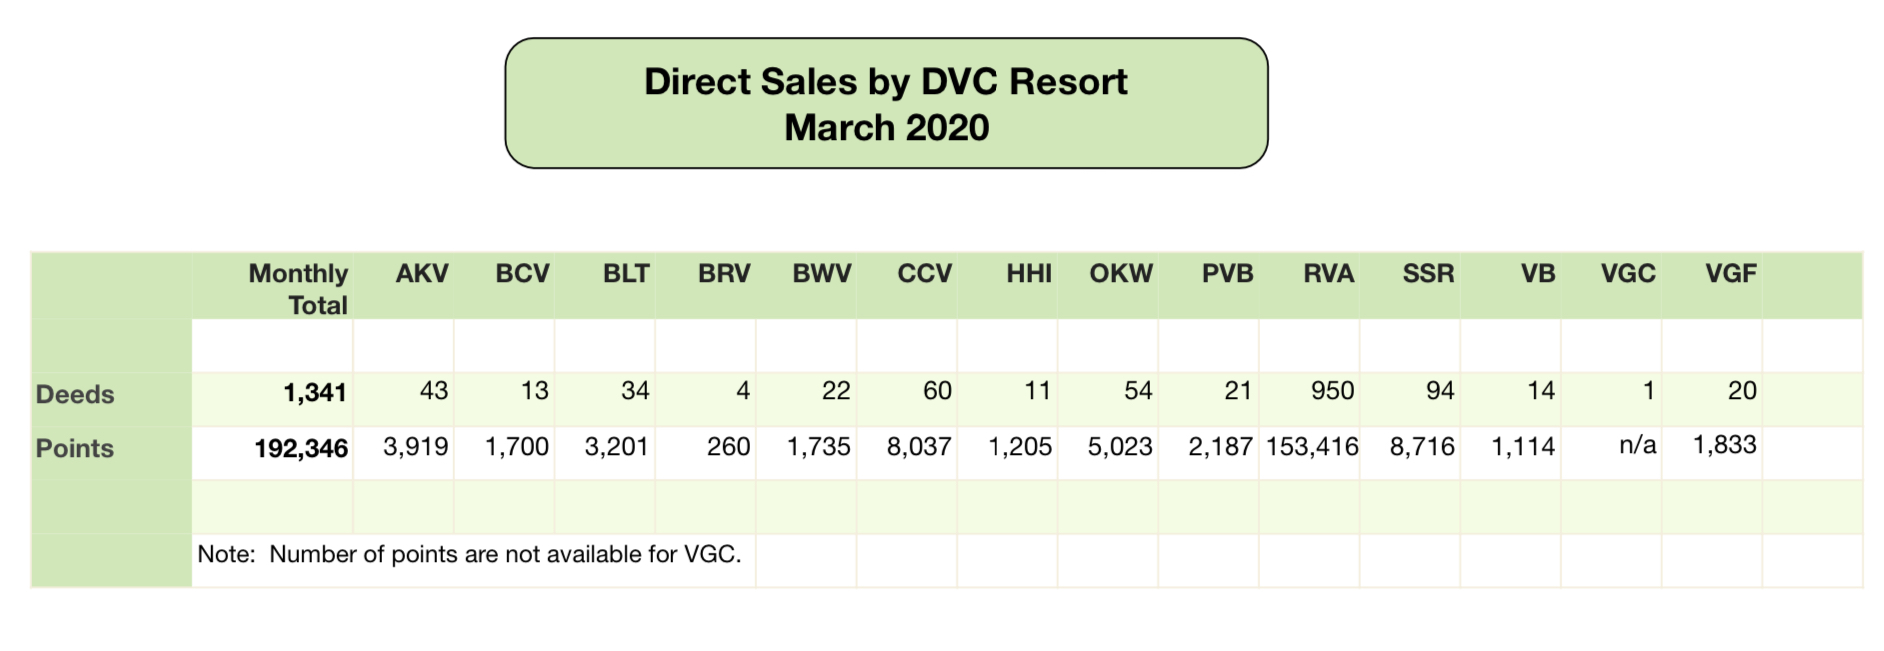 DVC Direct Sales - March 2020